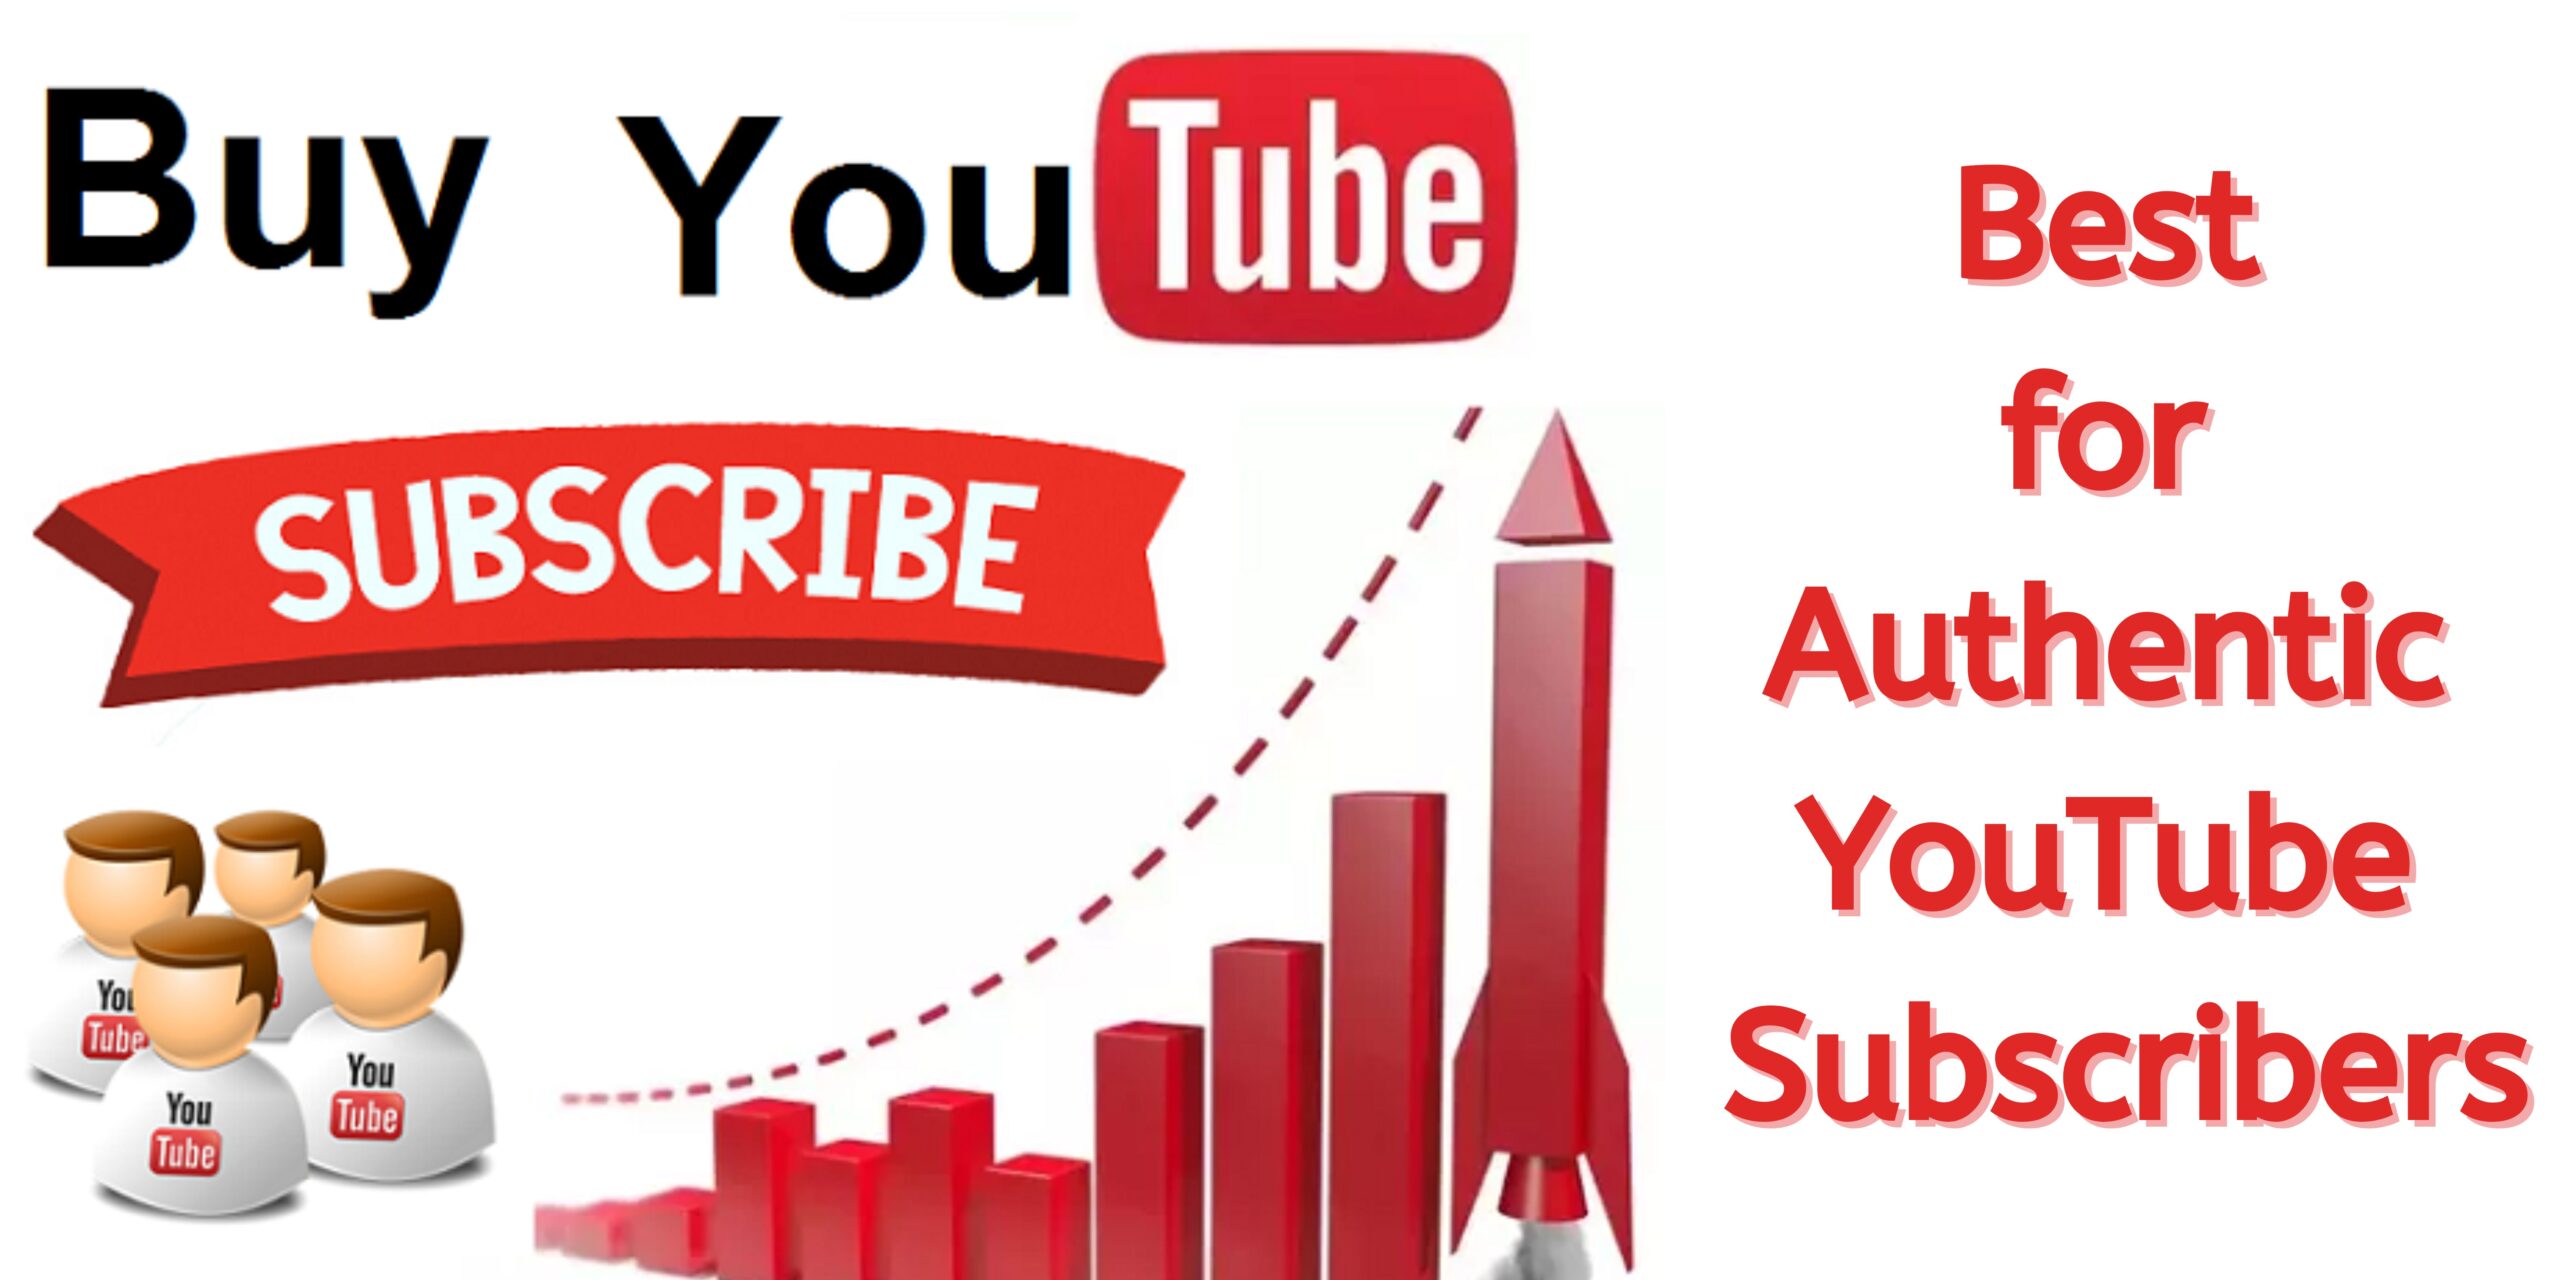 What Are the Benefits of YouTube Subscribers?